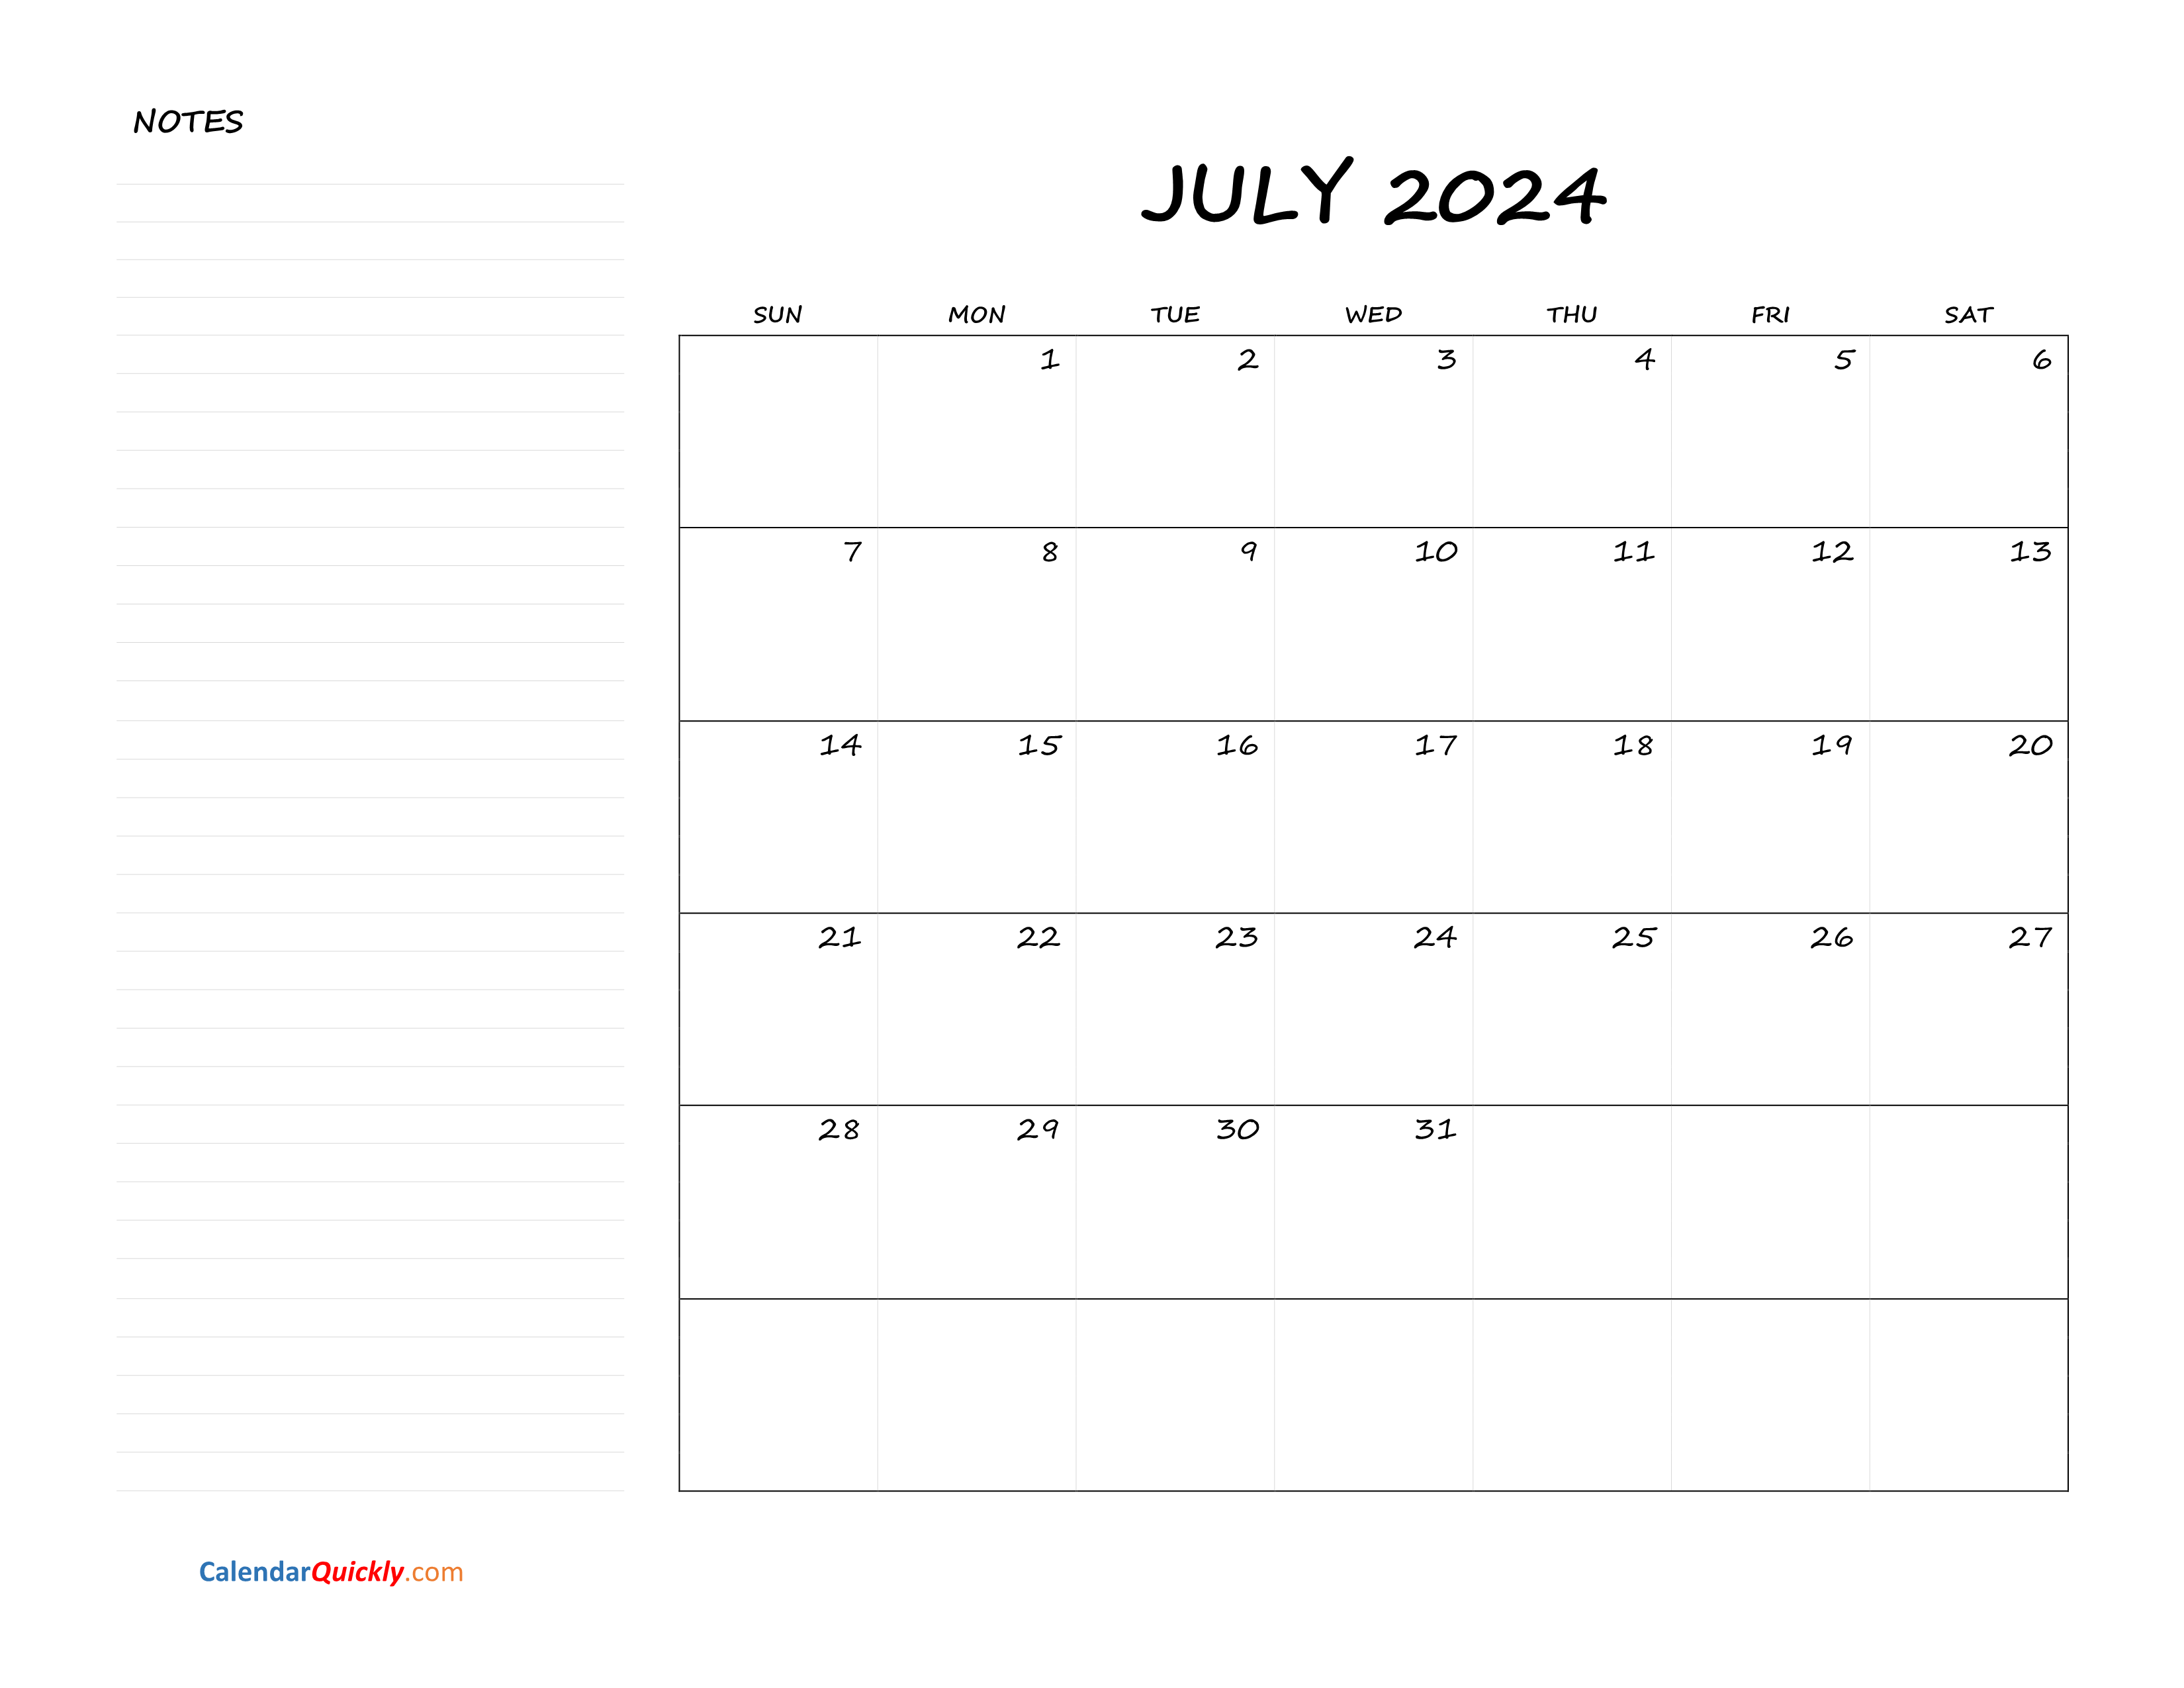 July Blank Calendar 2024 with Notes Calendar Quickly